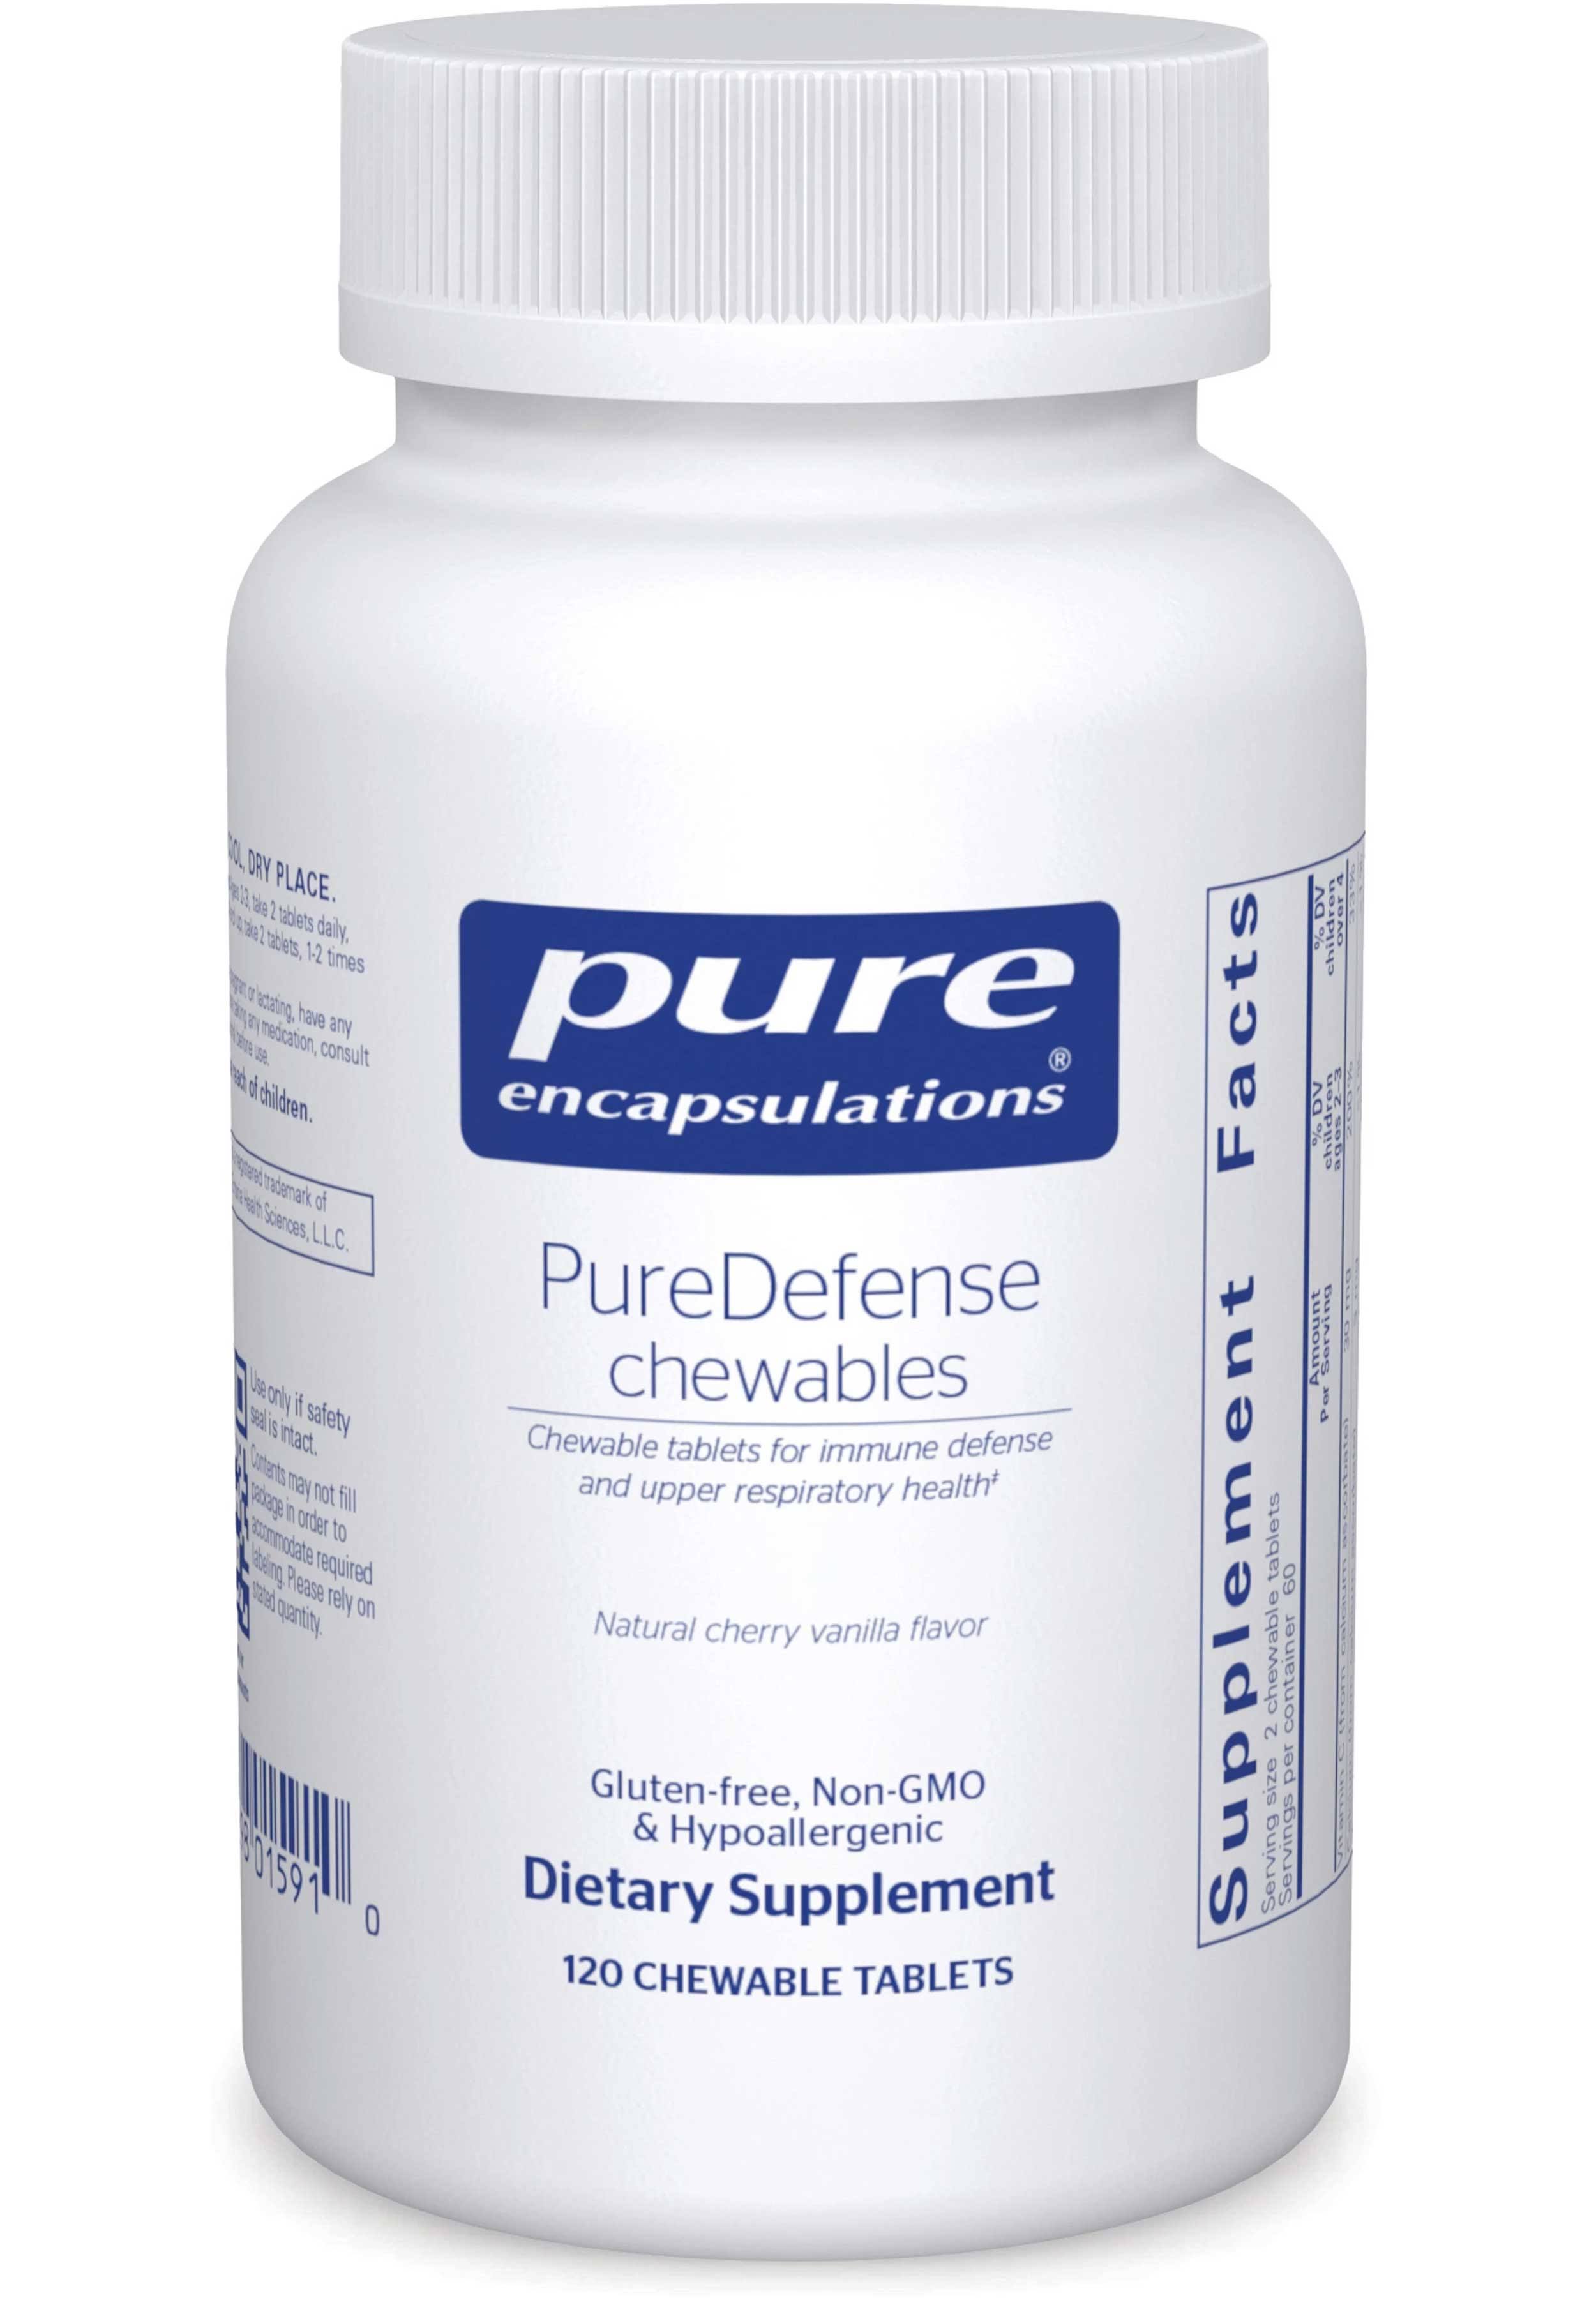 Pure Encapsulations PureDefense Chewables Hypoallergenic Dietary Supplement - 120ct